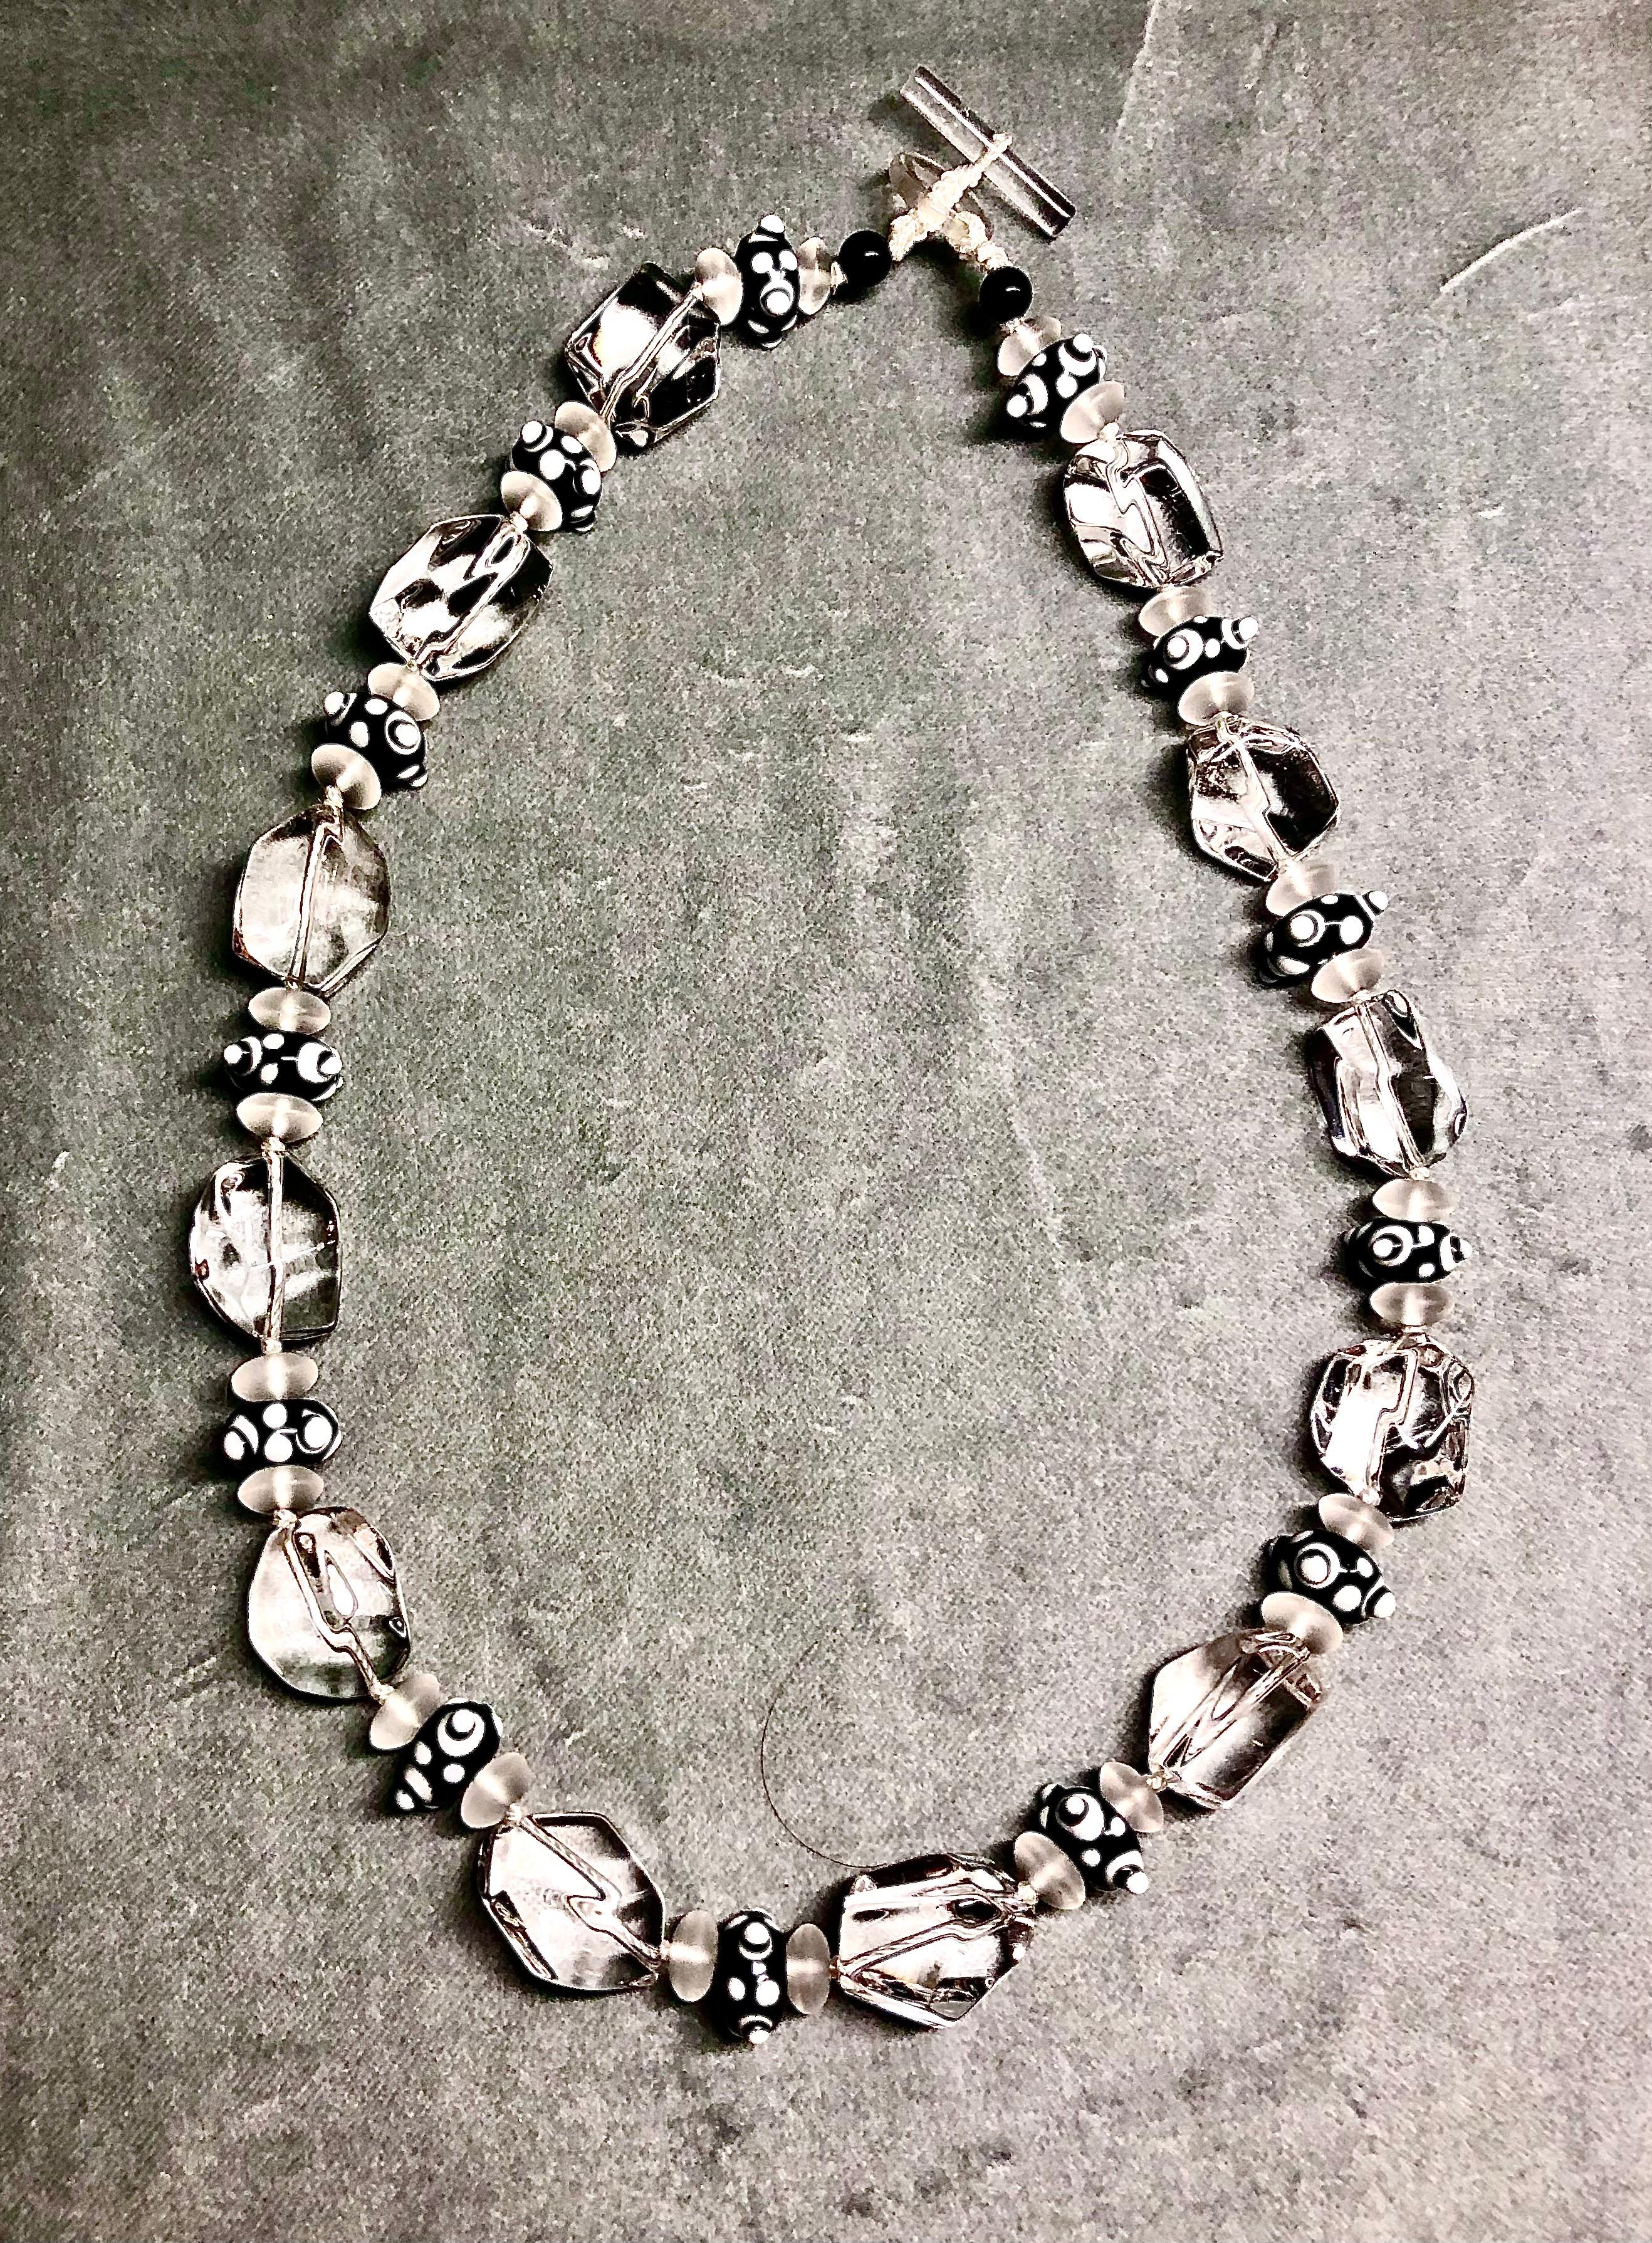 Fabulously elegant yet understated necklace of very large tumbled chunky rock crystal beads. In between the shimmering rock crystal “rocks“ are Art Deco black and white Venetian lamp work beads. These beads are of exquisite quality and most unusual